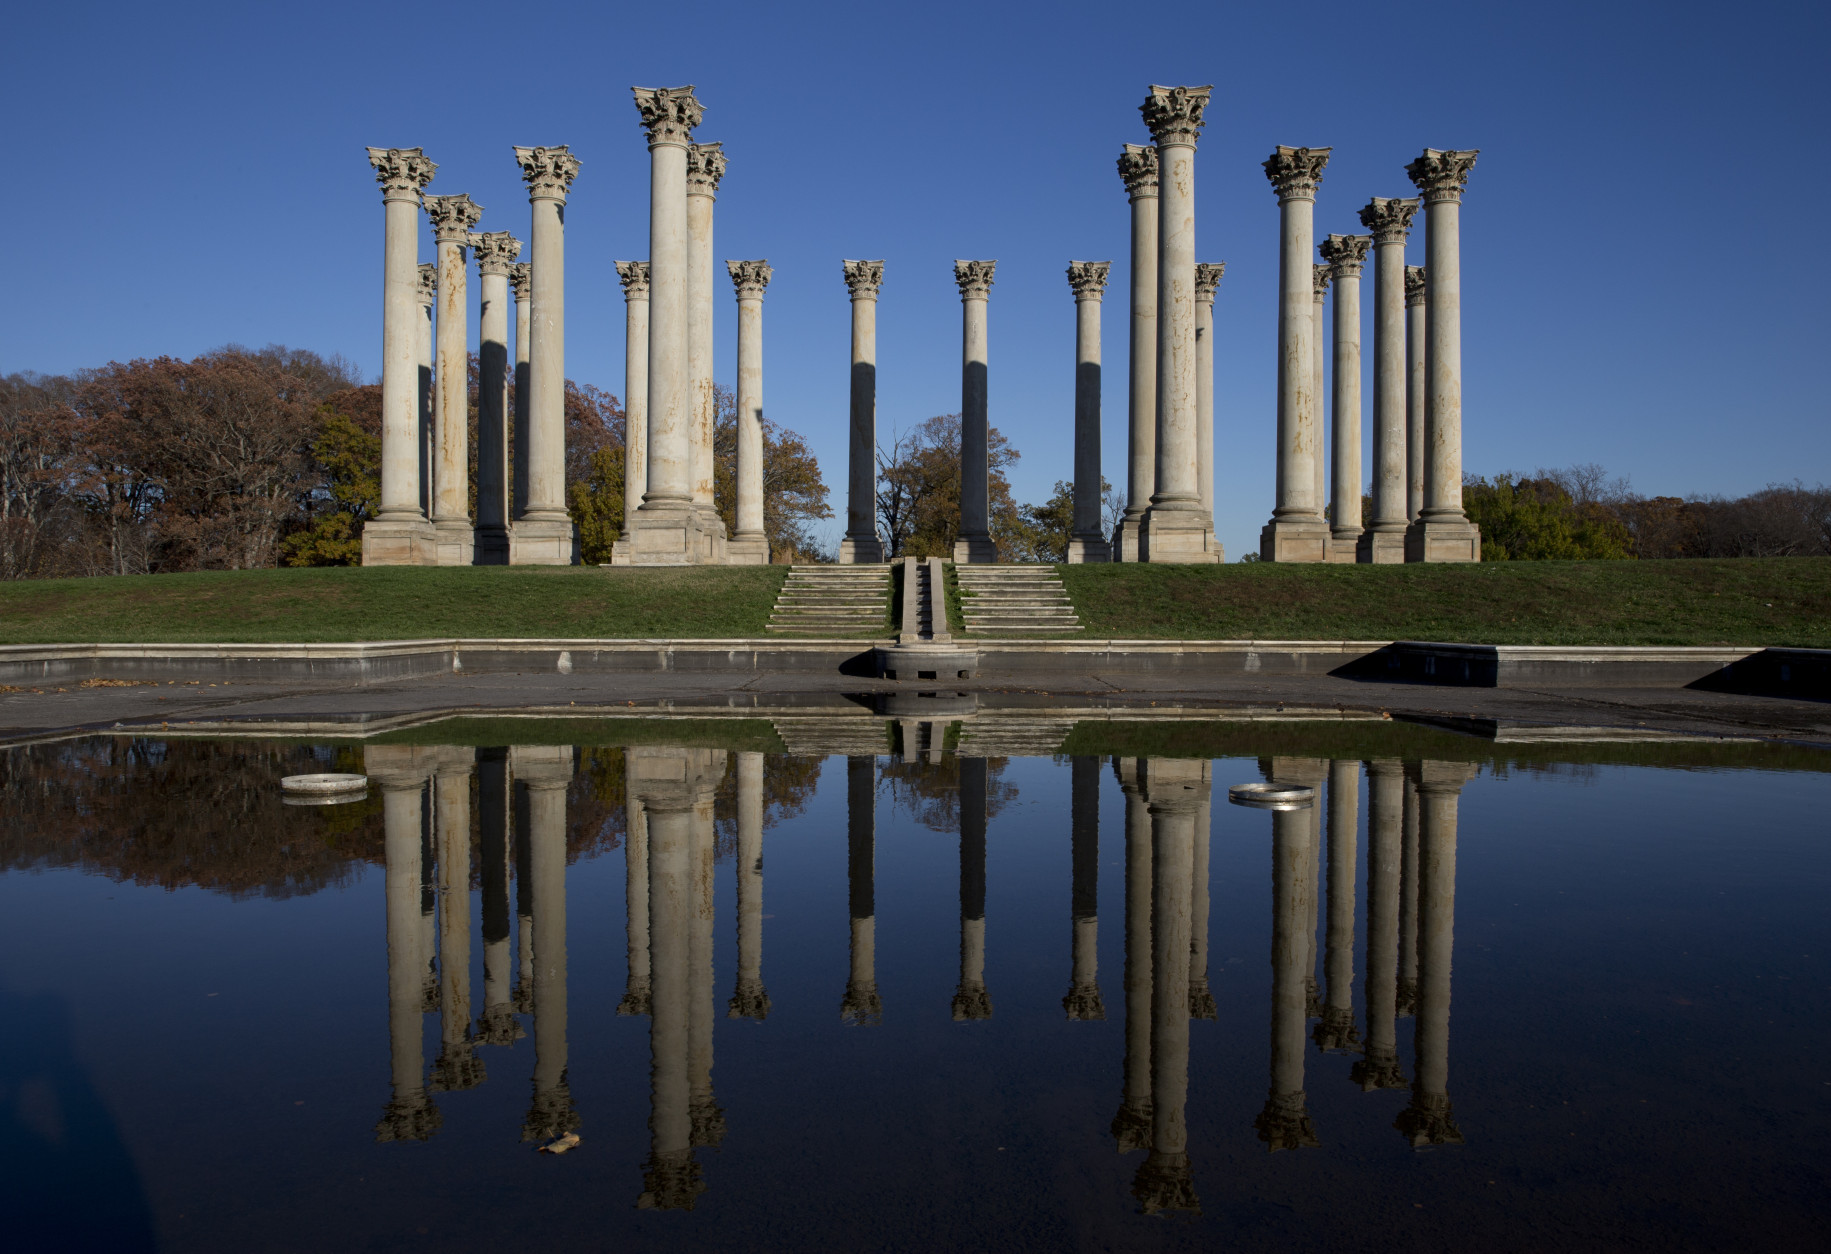 The U.S. Capitol's former columns still stand at the United States National Arboretum in Washington. (AP Photo/Carolyn Kaster)